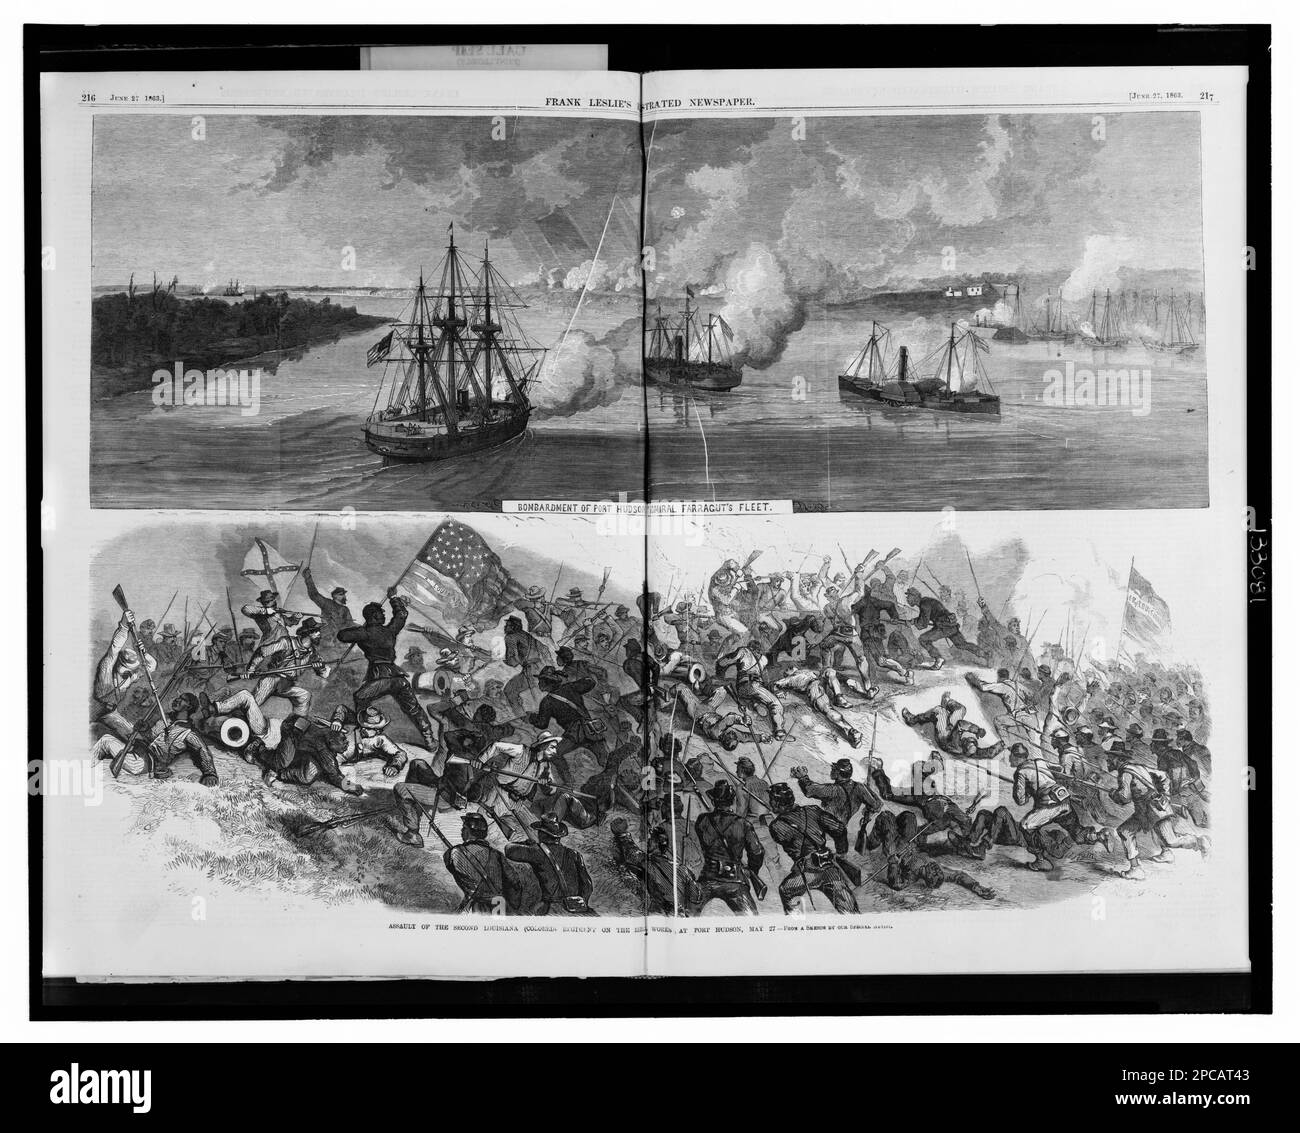 Bombardment of Port Hudson by Admiral Farragut's fleet Assault of the Second Louisiana (Colored) regiment on the Rebel works at Port Hudson, May 27 / / from a sketch by our special artist.. Title from item, Illus. in: Frank Leslie's illustrated newspaper, v. 16, no. 404 (1863 June 27), p. 216-217. Farragut, David Glasgow, 1801-1870, Military service, Campaigns & battles, Louisiana, Port Hudson, 1860-1870, Bombardment, Louisiana, Port Hudson, 1860-1870, African Americans, Military service, 1860-1870, United States, History, Civil War, 1861-1865, Military personnel, Union, United States, History Stock Photo